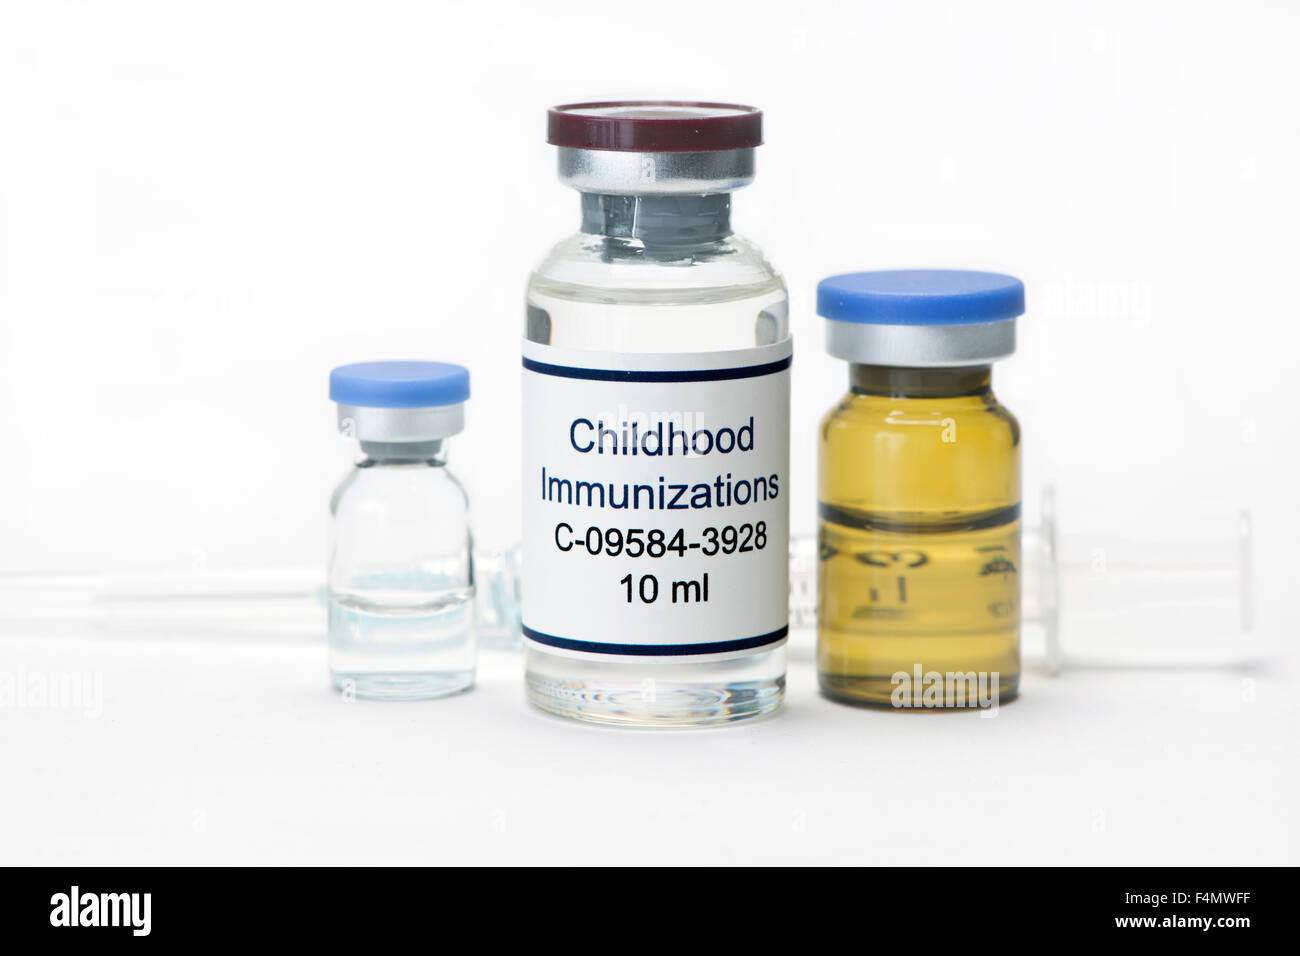 Childhood vaccine with various vials and syringe.  Label is fictitious and bears no resemblance to any actual product. Stock Photo